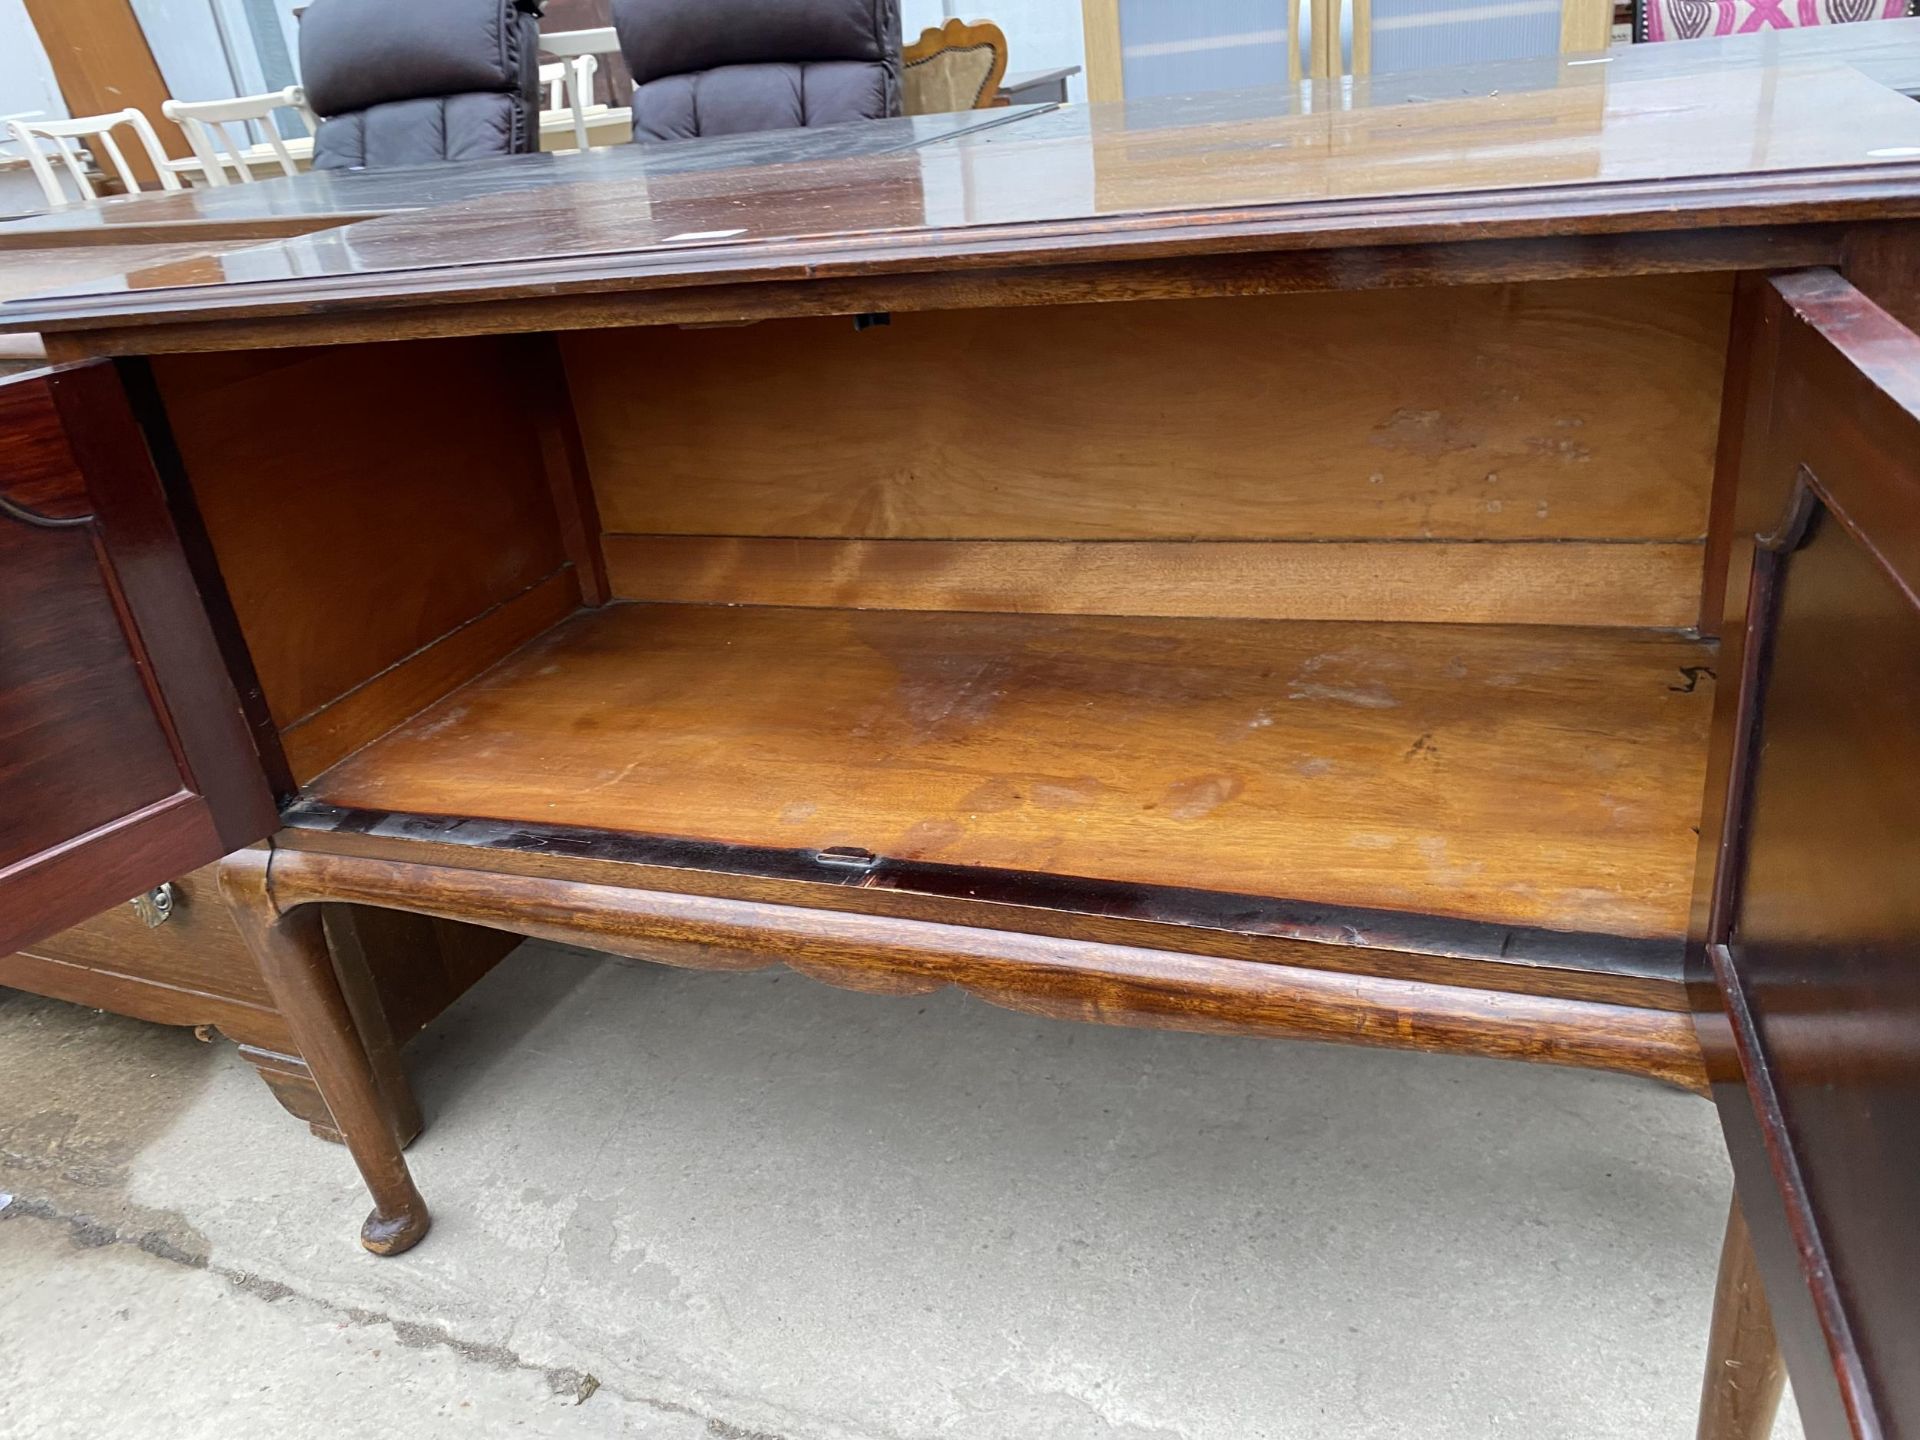 AN EDWARDIAN MAHOGANY TWO DOOR WASHSTAND, 41" WIDE - Image 5 of 5